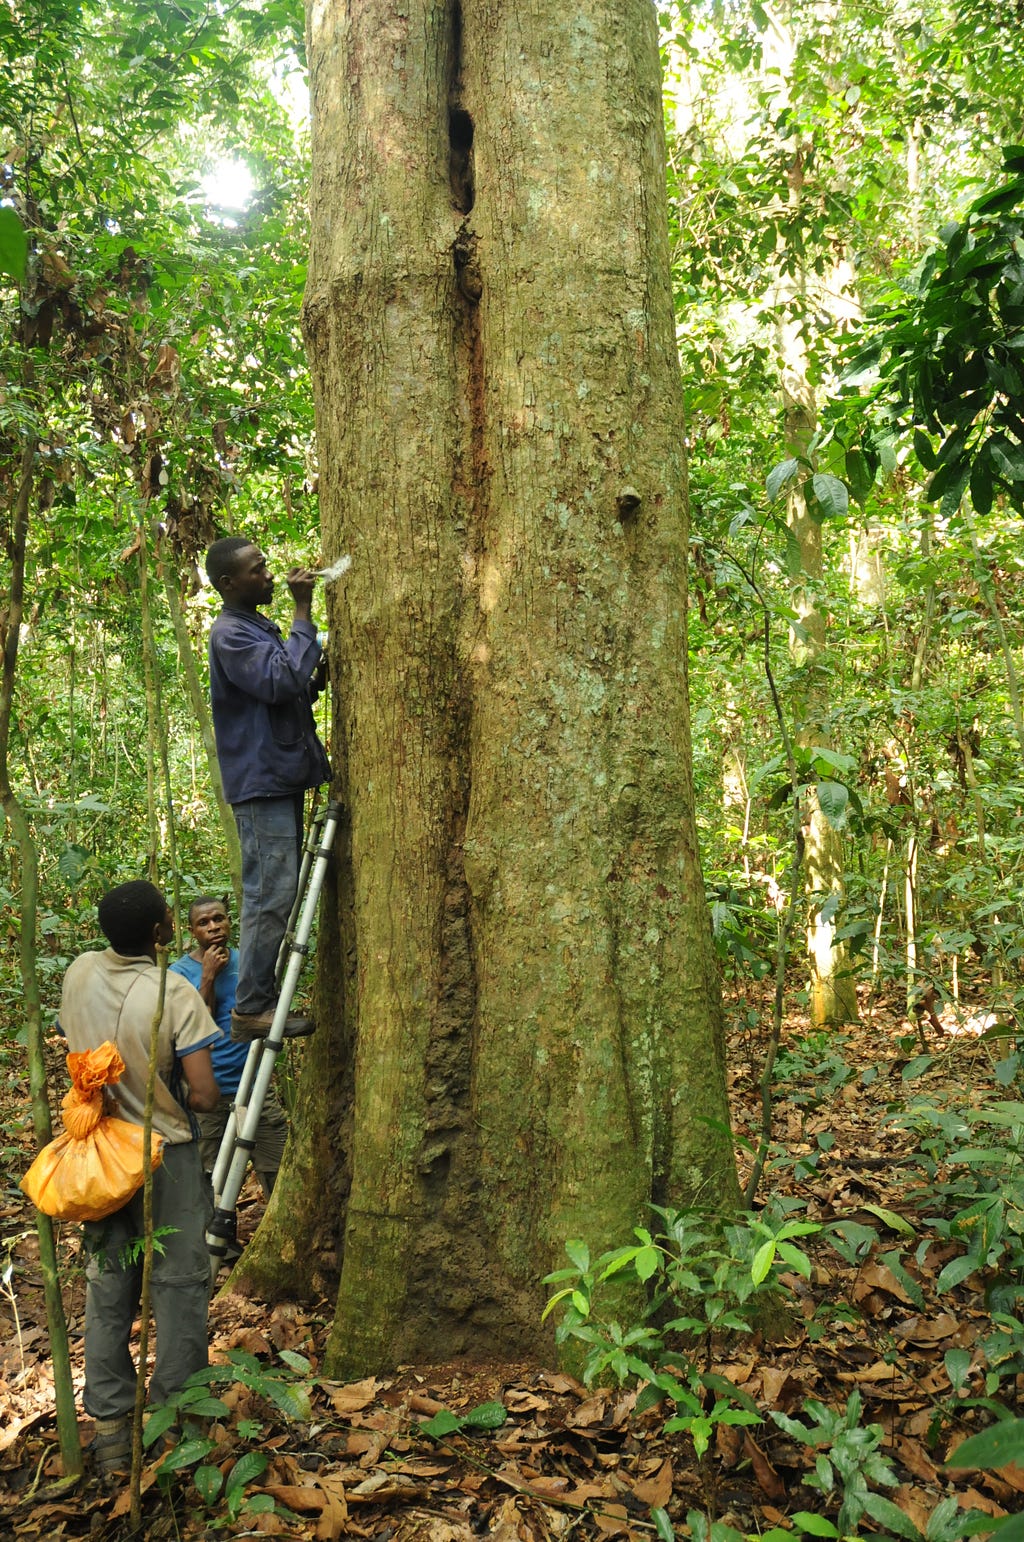 Three men stand next to a tree. One of them is standing on a ladder while painting a line on the tree. The other two are below him, standing by the ladder.